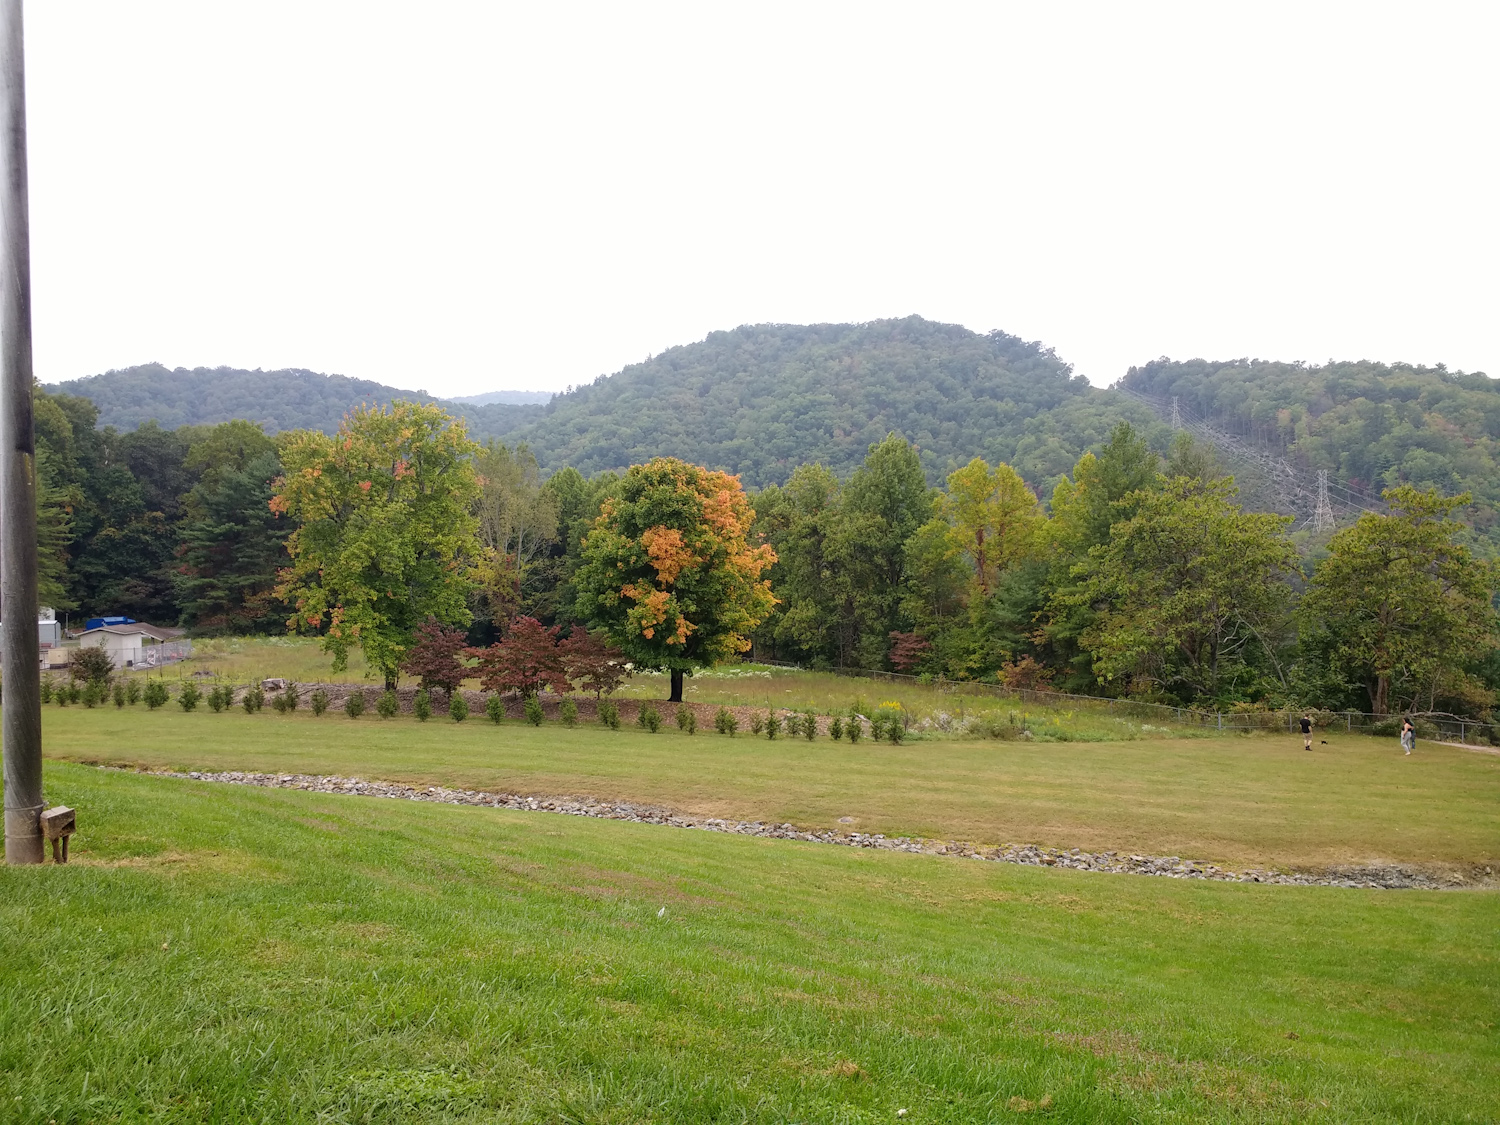 Scenery on access road to the Biltmore Estate in Ashville NC.